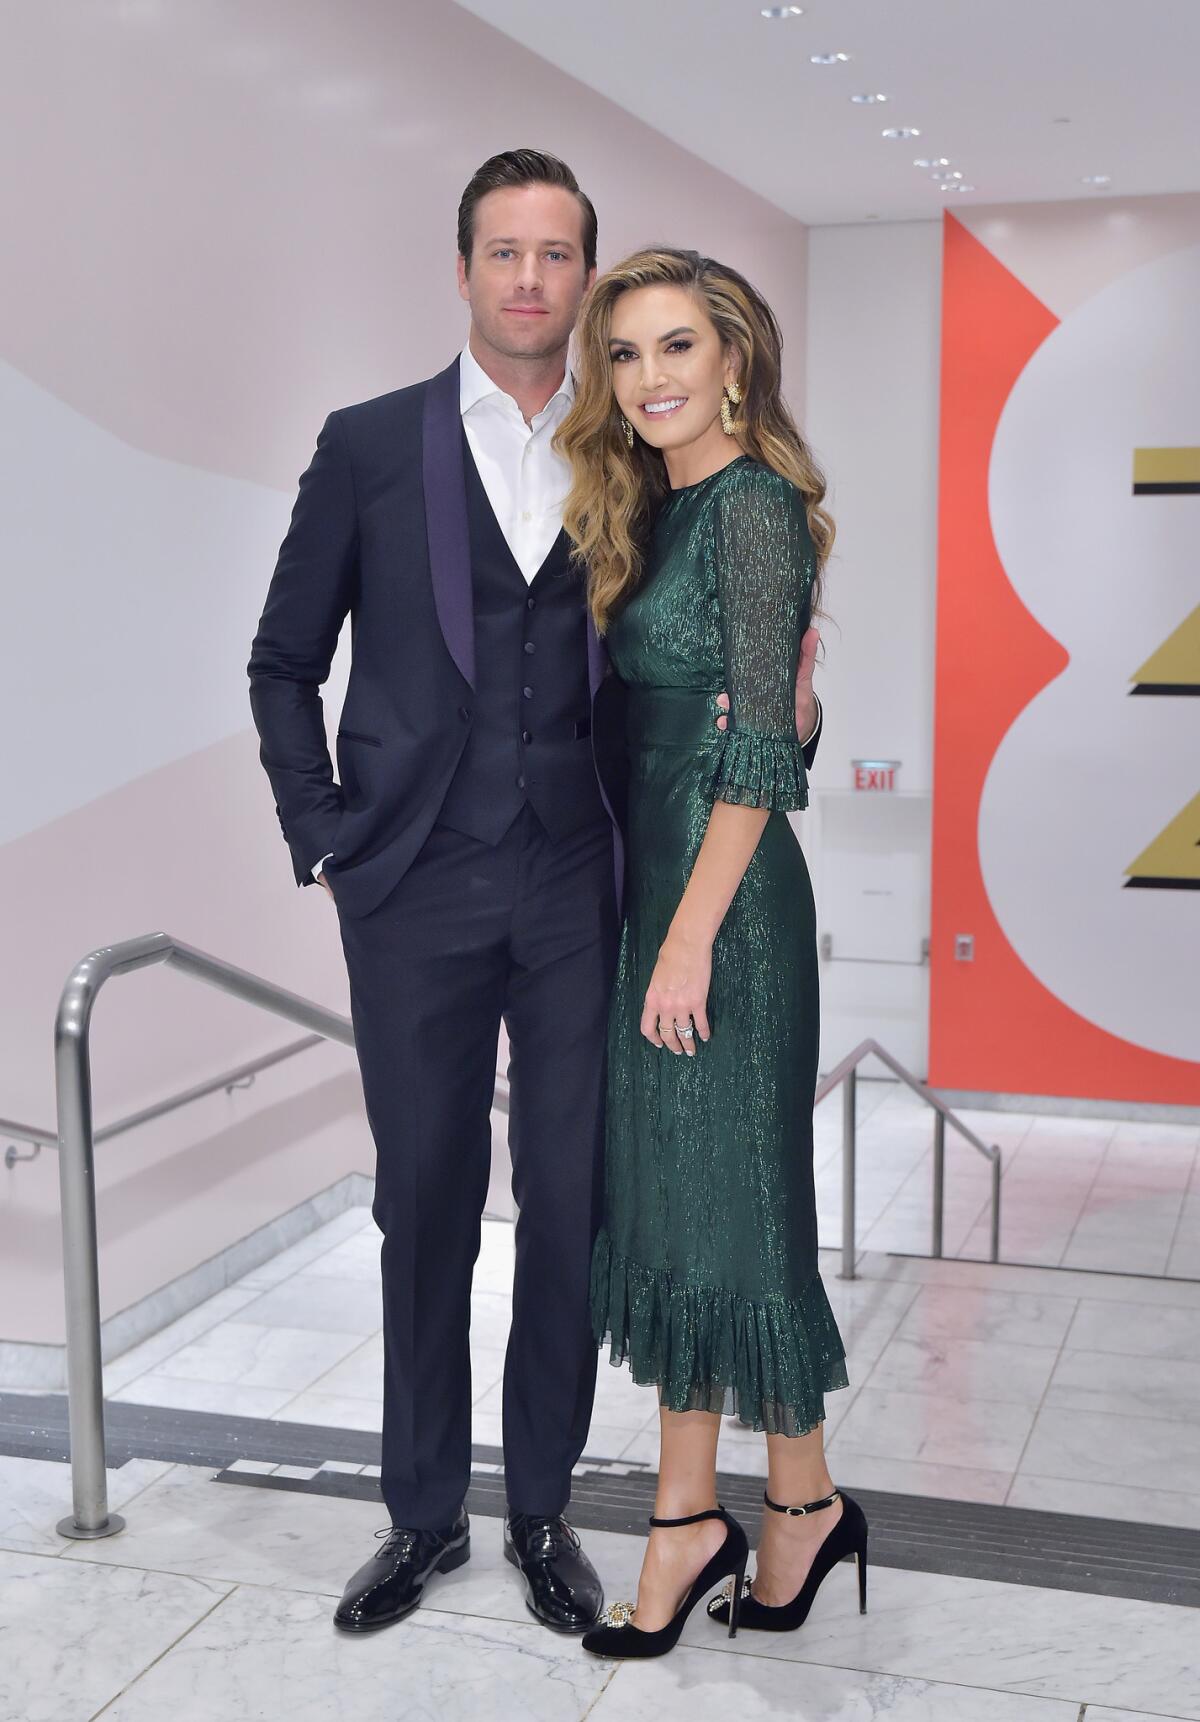 Armie Hammer and Elizabeth Chambers at the Hammer Museum gala.